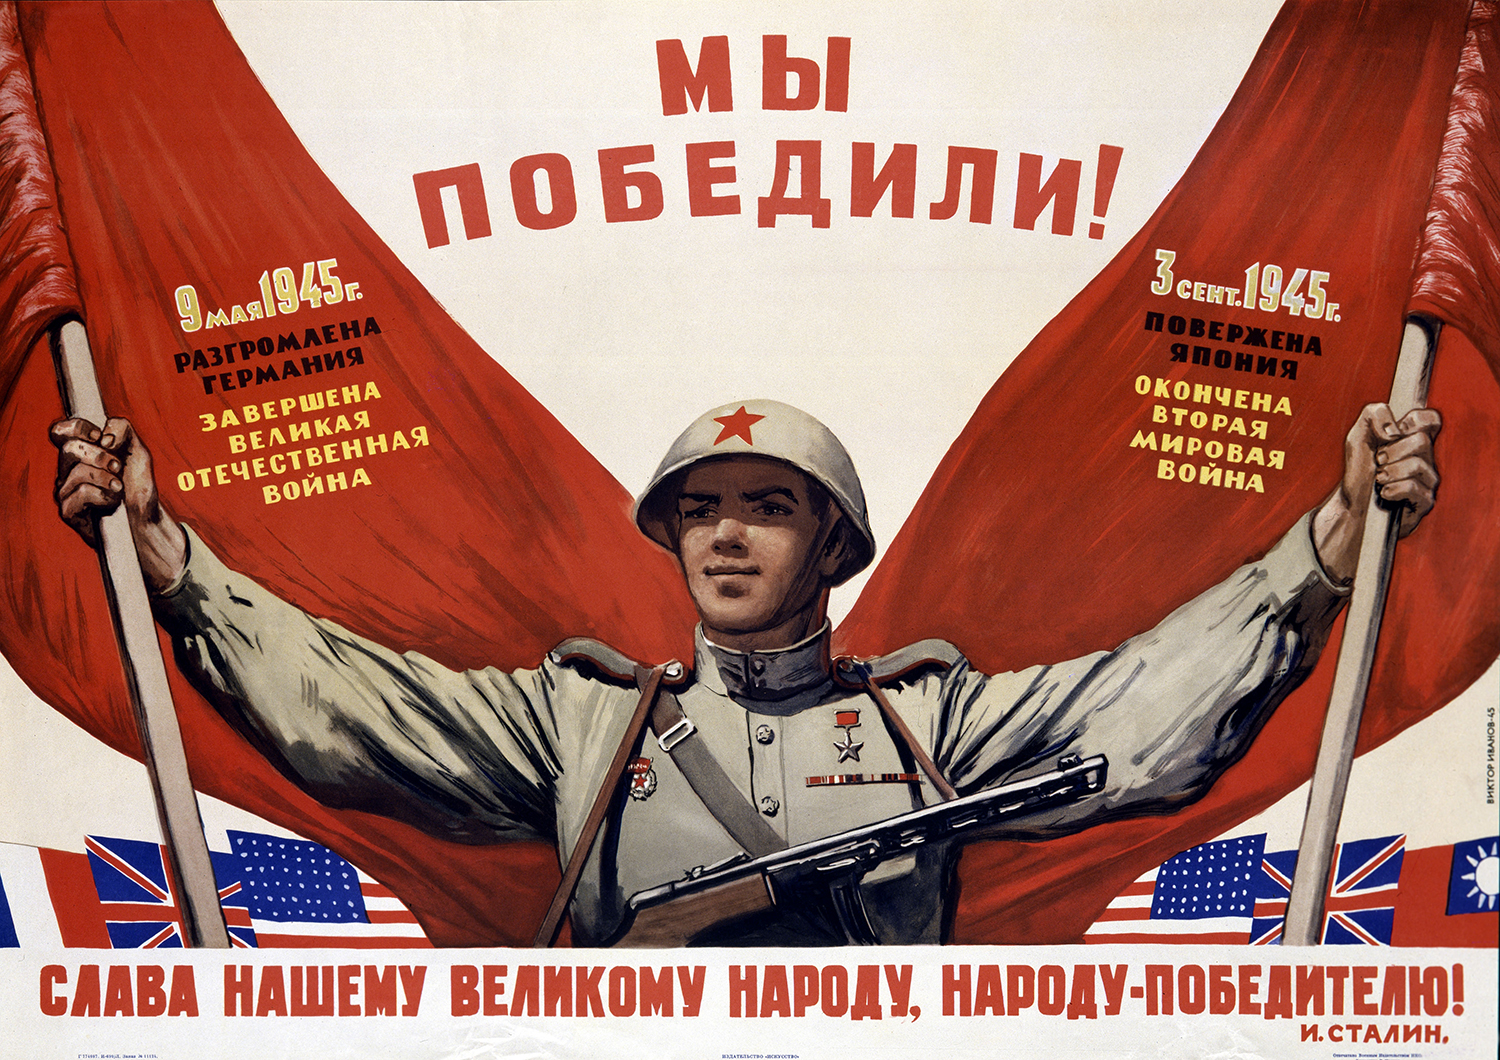 Soviet Foreign Policy Before World War Two | The Second World War